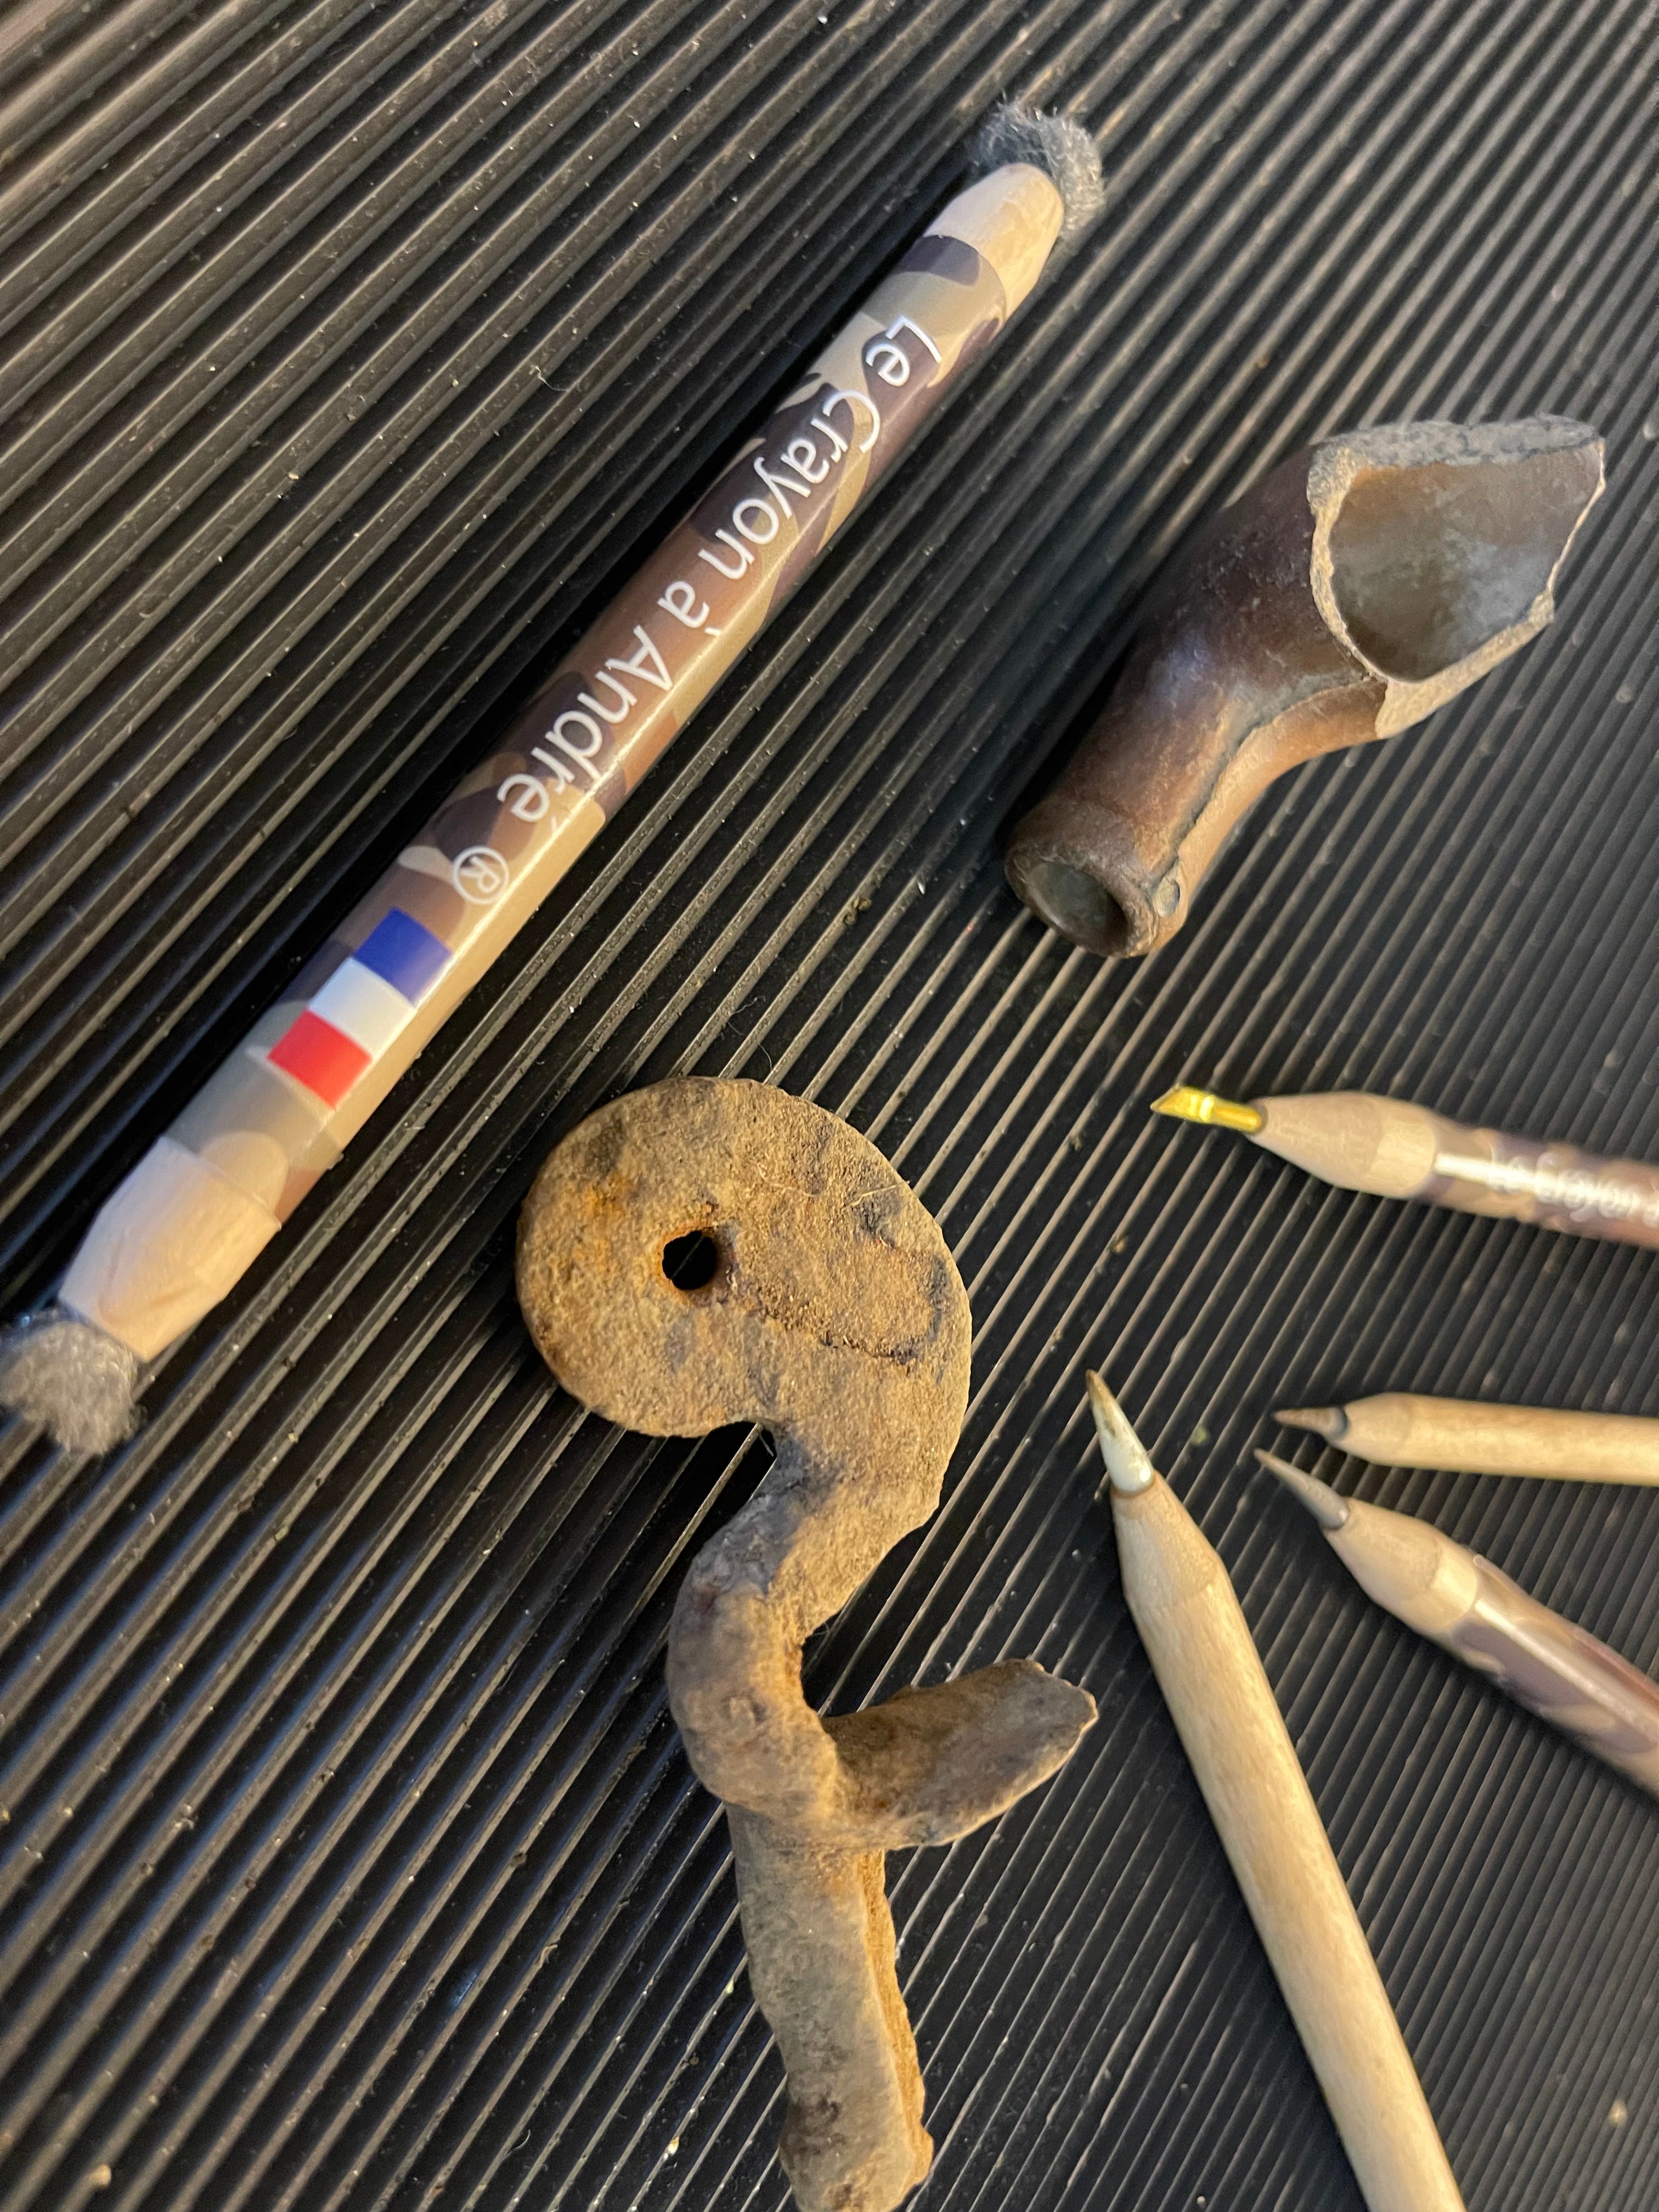 andre's coin and relic cleaning pencil set in action with relics